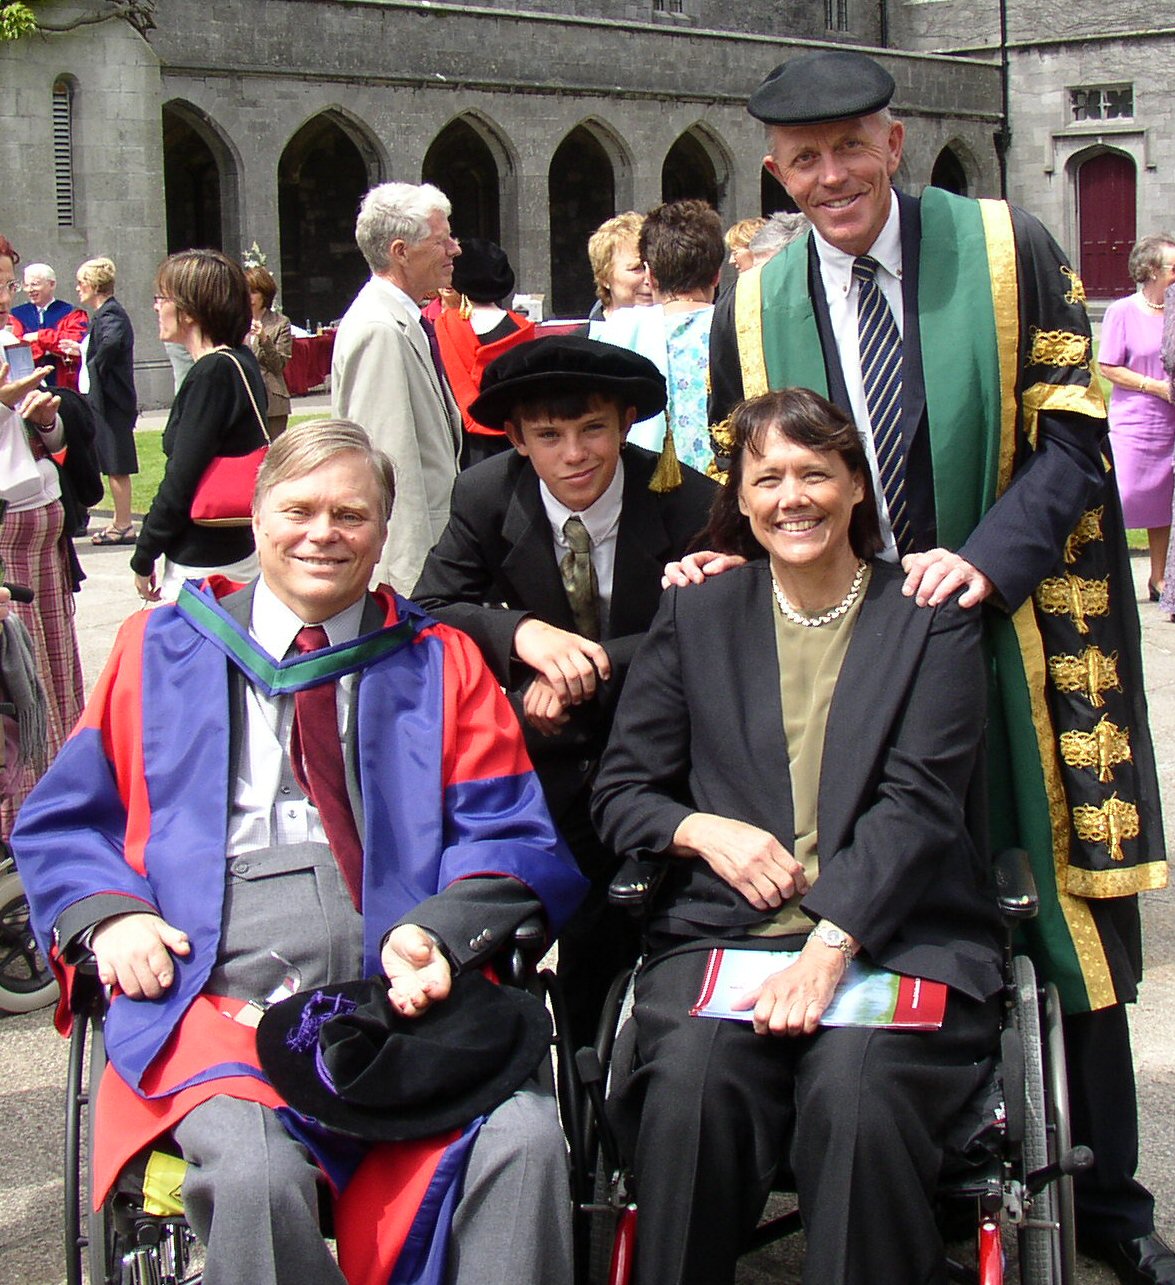 Lex, Joyce and Trey (grandson) with NUI Galway President